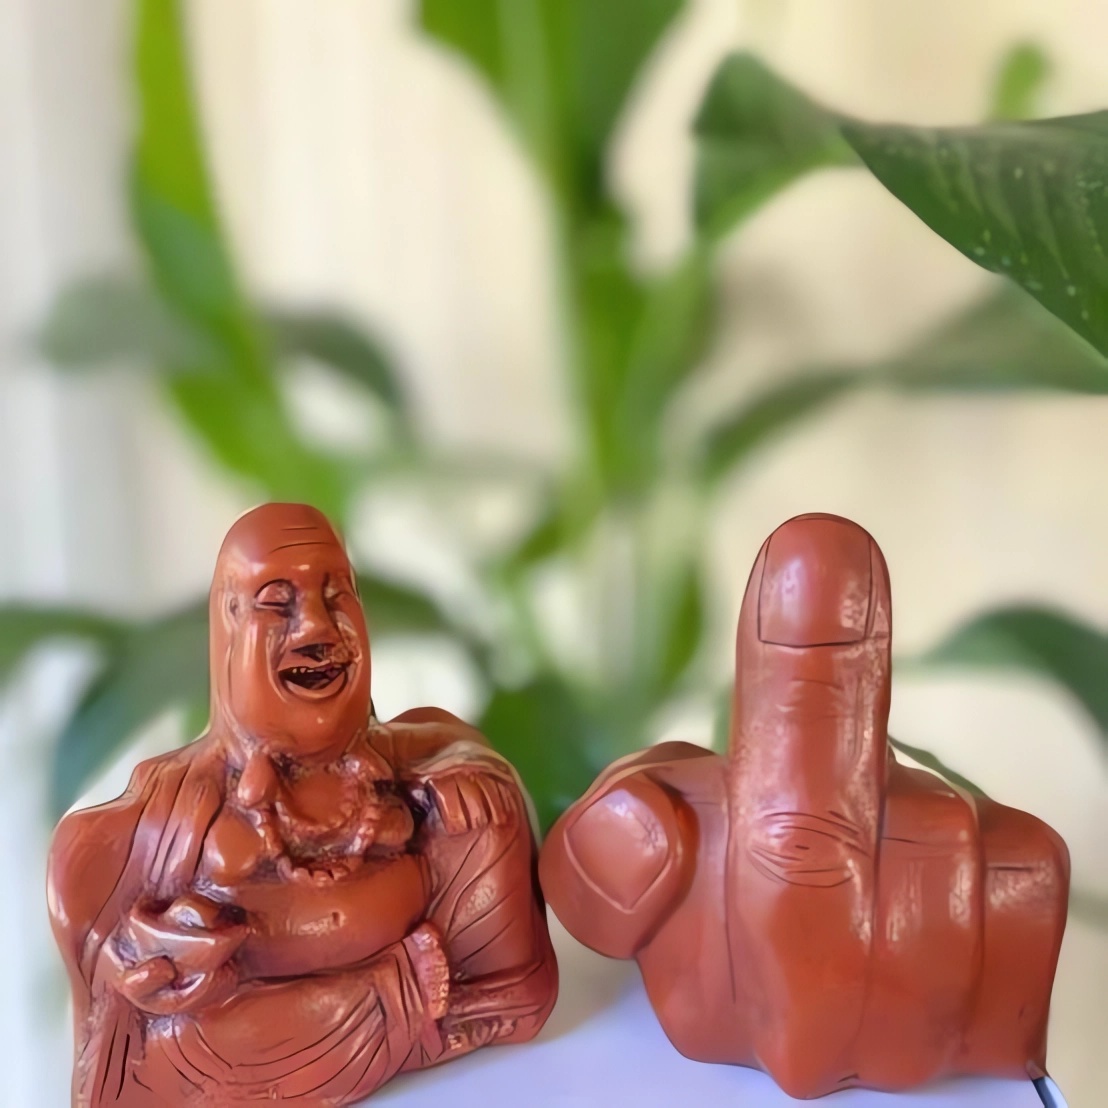 🔥Last Day Promotion 50% OFF🔥 - 🤣The Buddha Flip | Unexpected backside